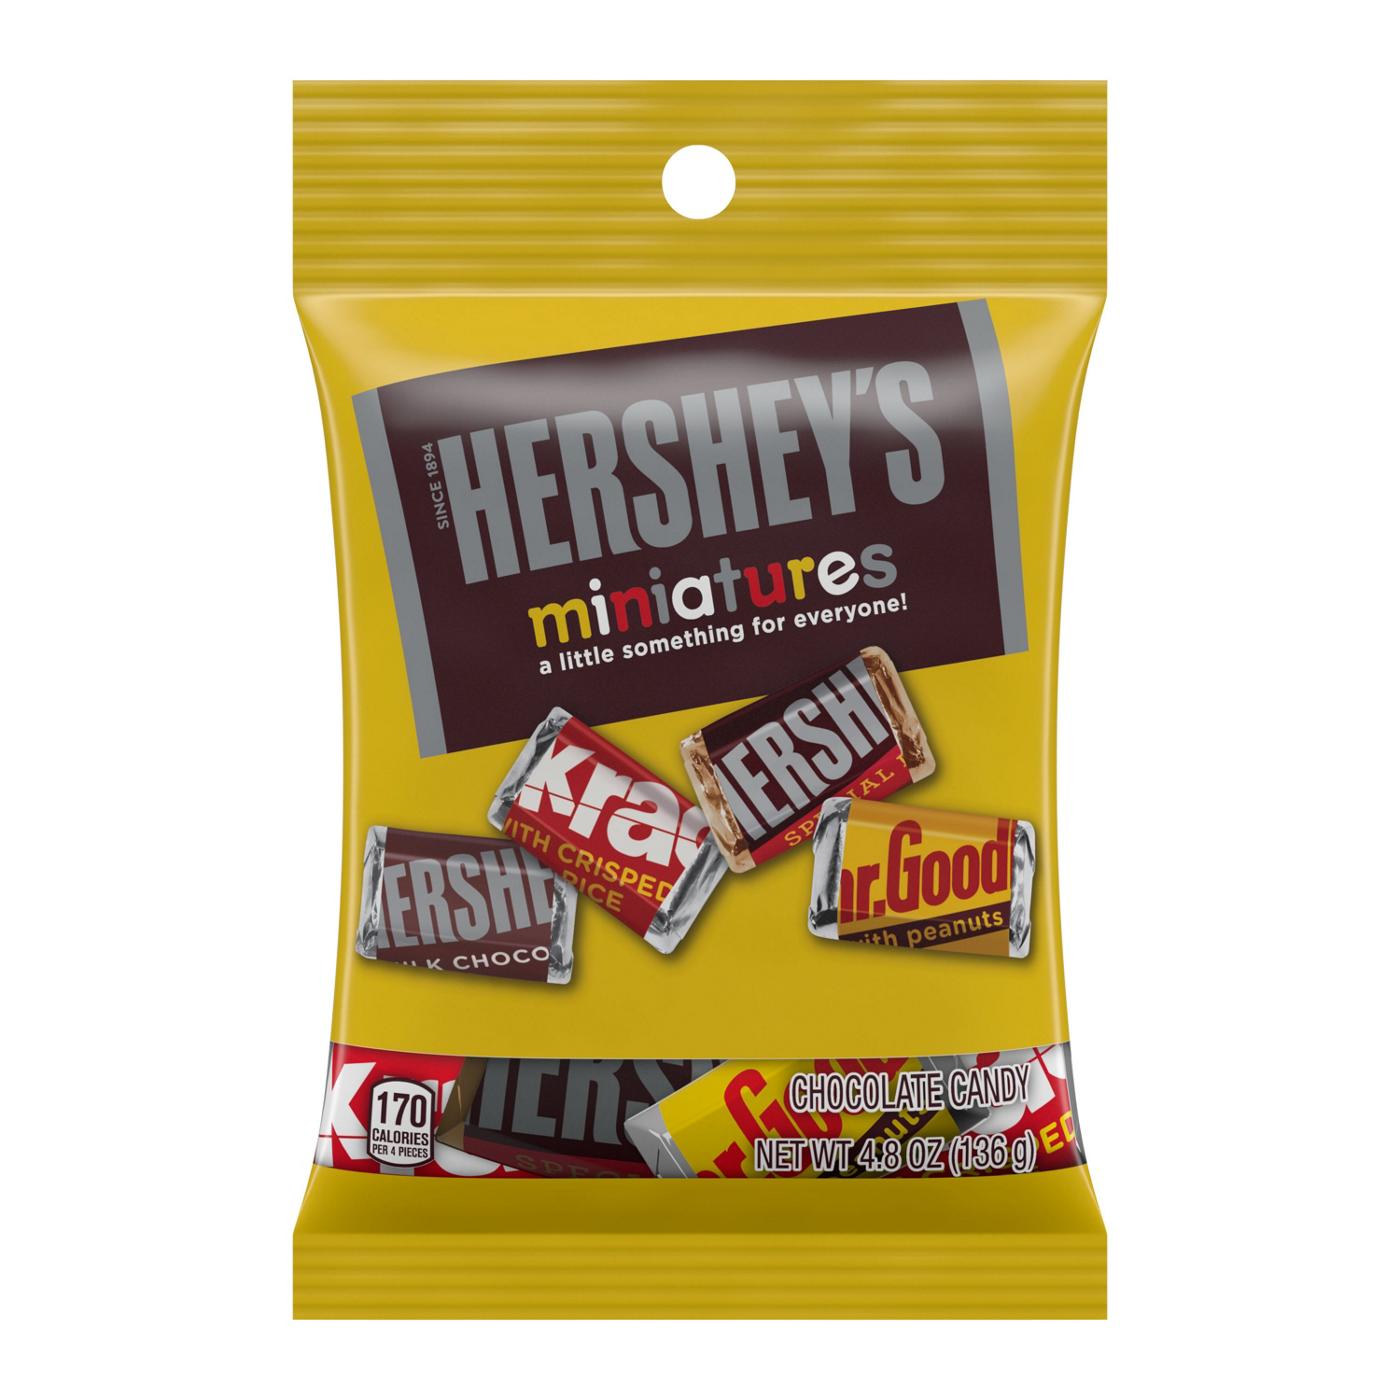 Hershey's Miniatures Assorted Chocolate Candy Bars; image 1 of 2